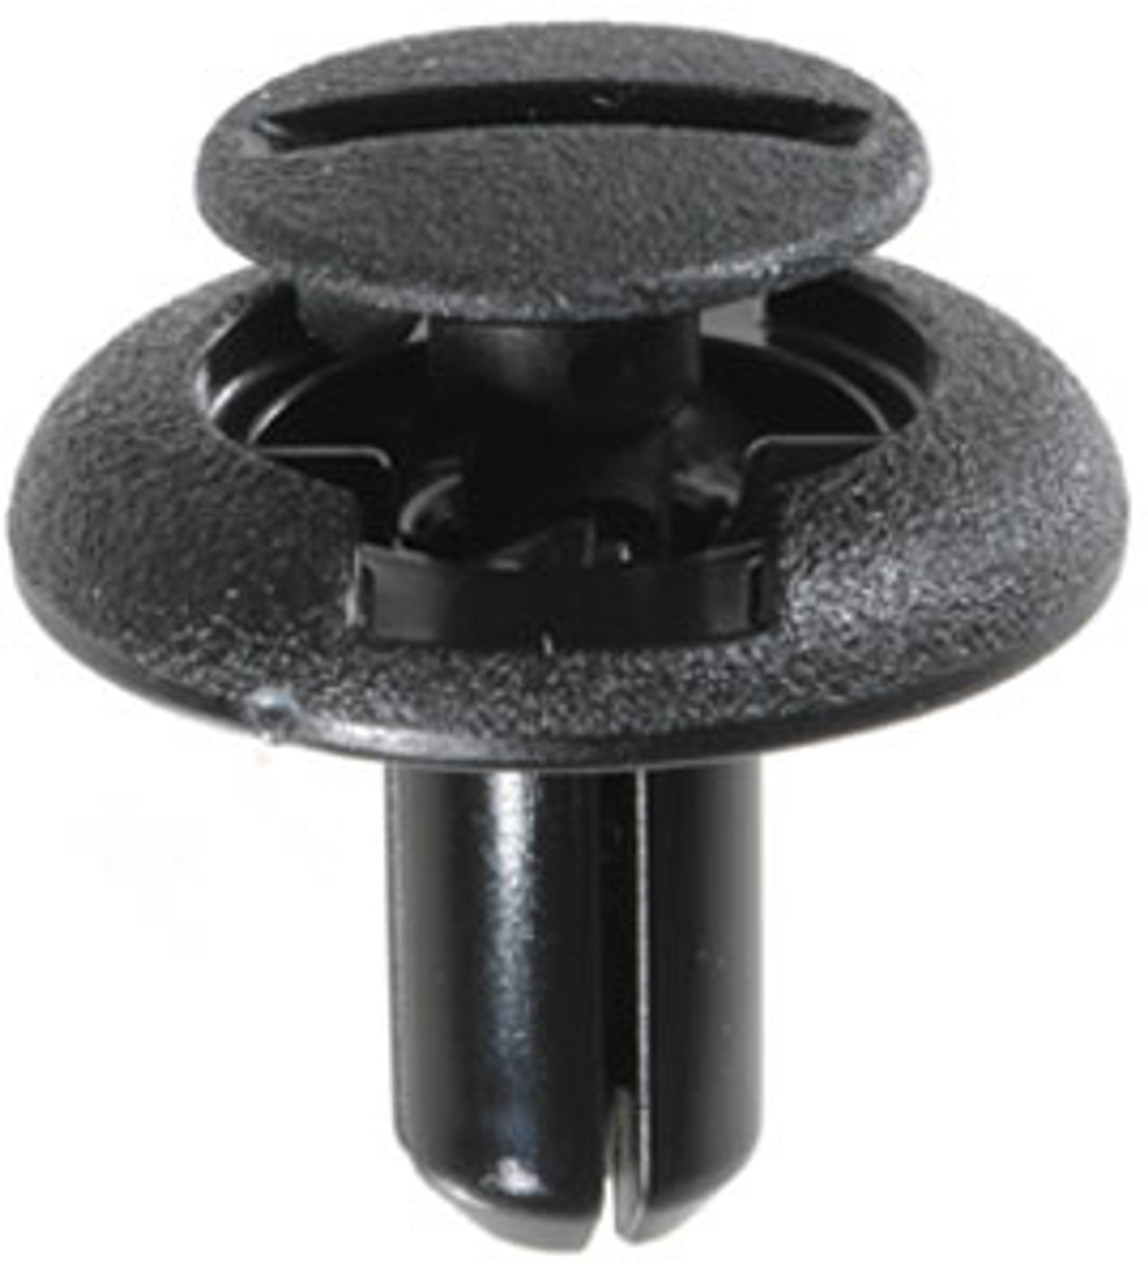 Cowl Vent Push-Type Retainer
Head Diameter: 20mm
Stem Length: 12mm
Fits Into 7mm Hole
Subaru Legacy & Outback 2010-On
OEM#: 90914-0063
Black Nylon
10 Per Box
Click Next Image For Clip Detail